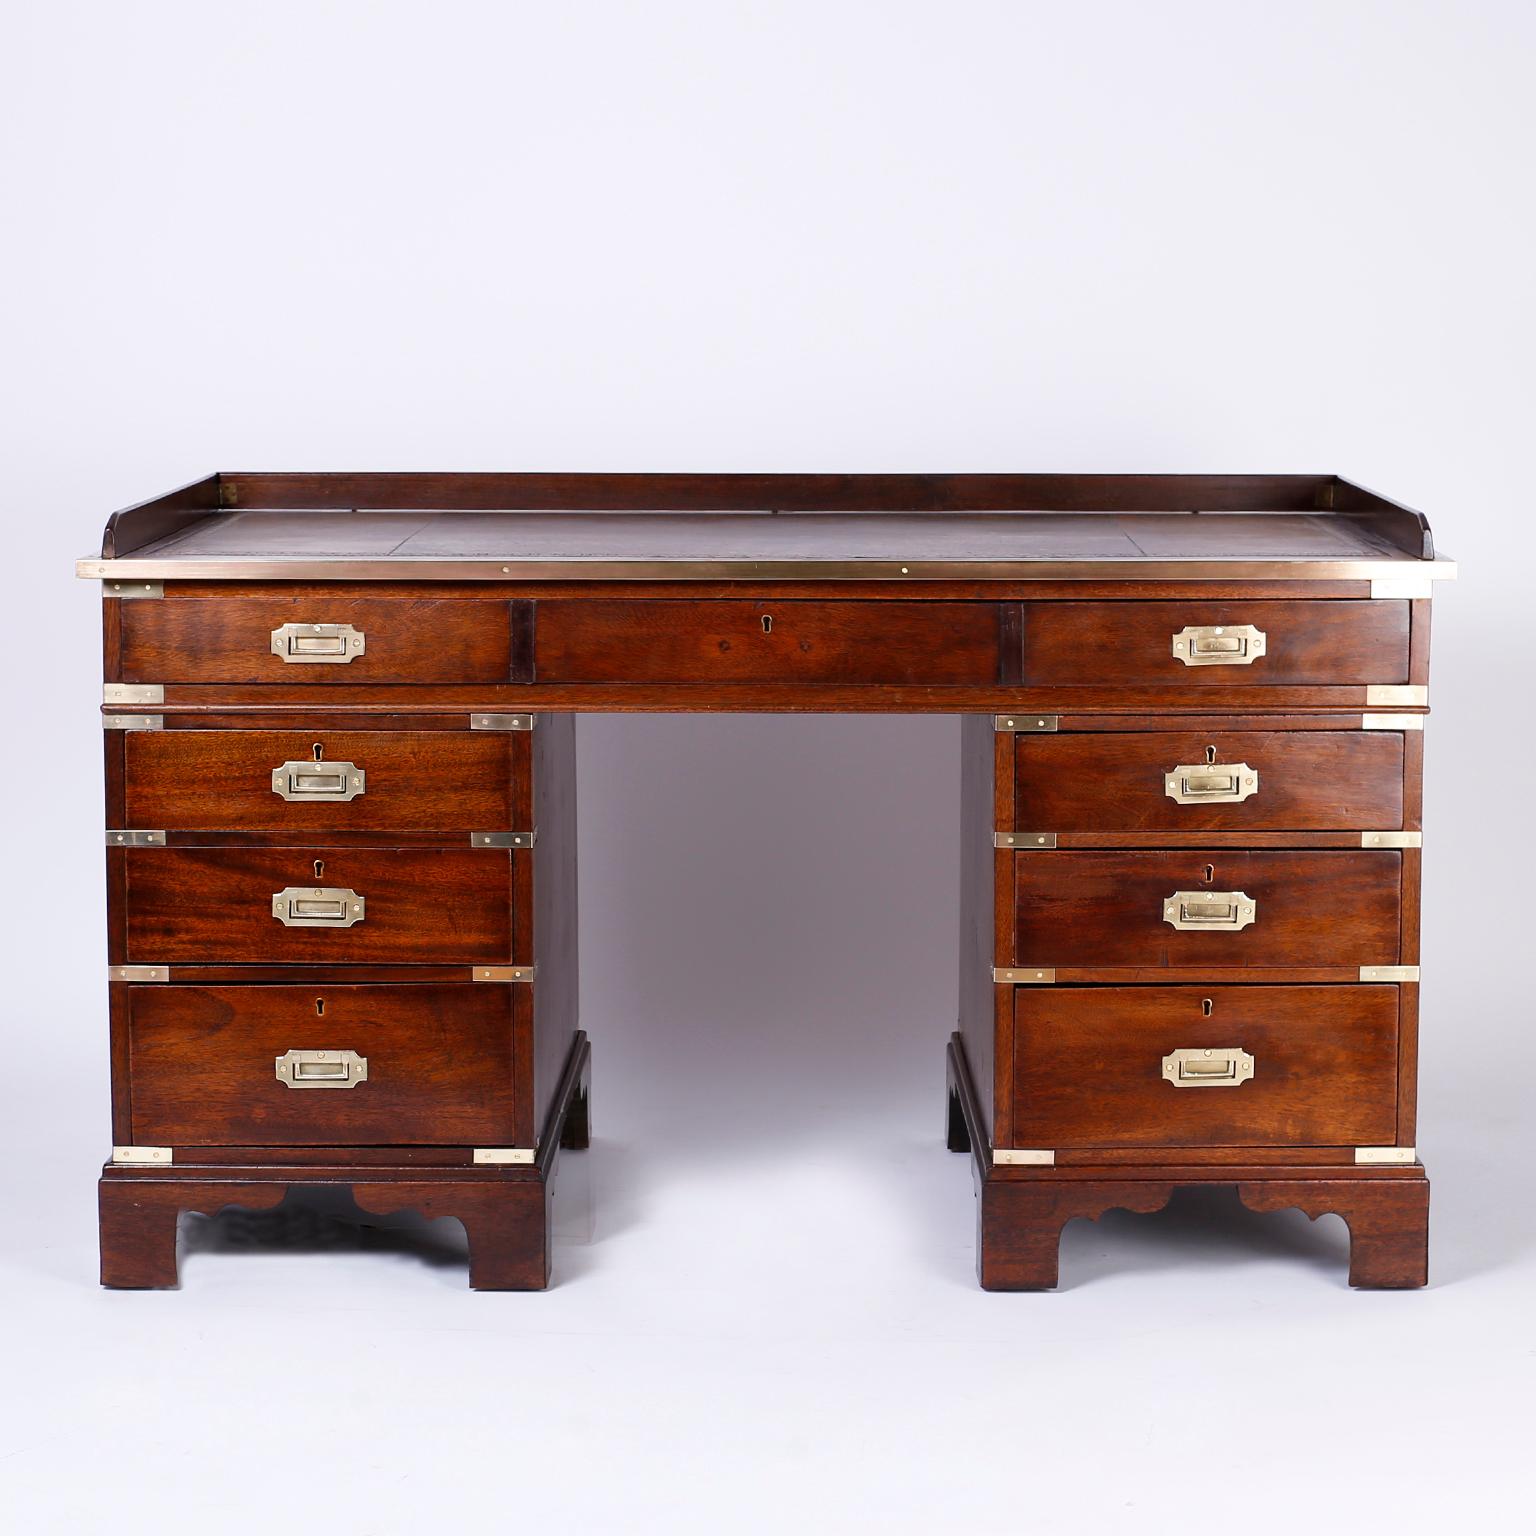 Handsome Chippendale style Campaign desk with a gallery around the top which retains its original tooled leather now aged to perfection. The seven drawer case is mahogany and has brass Campaign hardware, a finished back and sits on bracket feet.